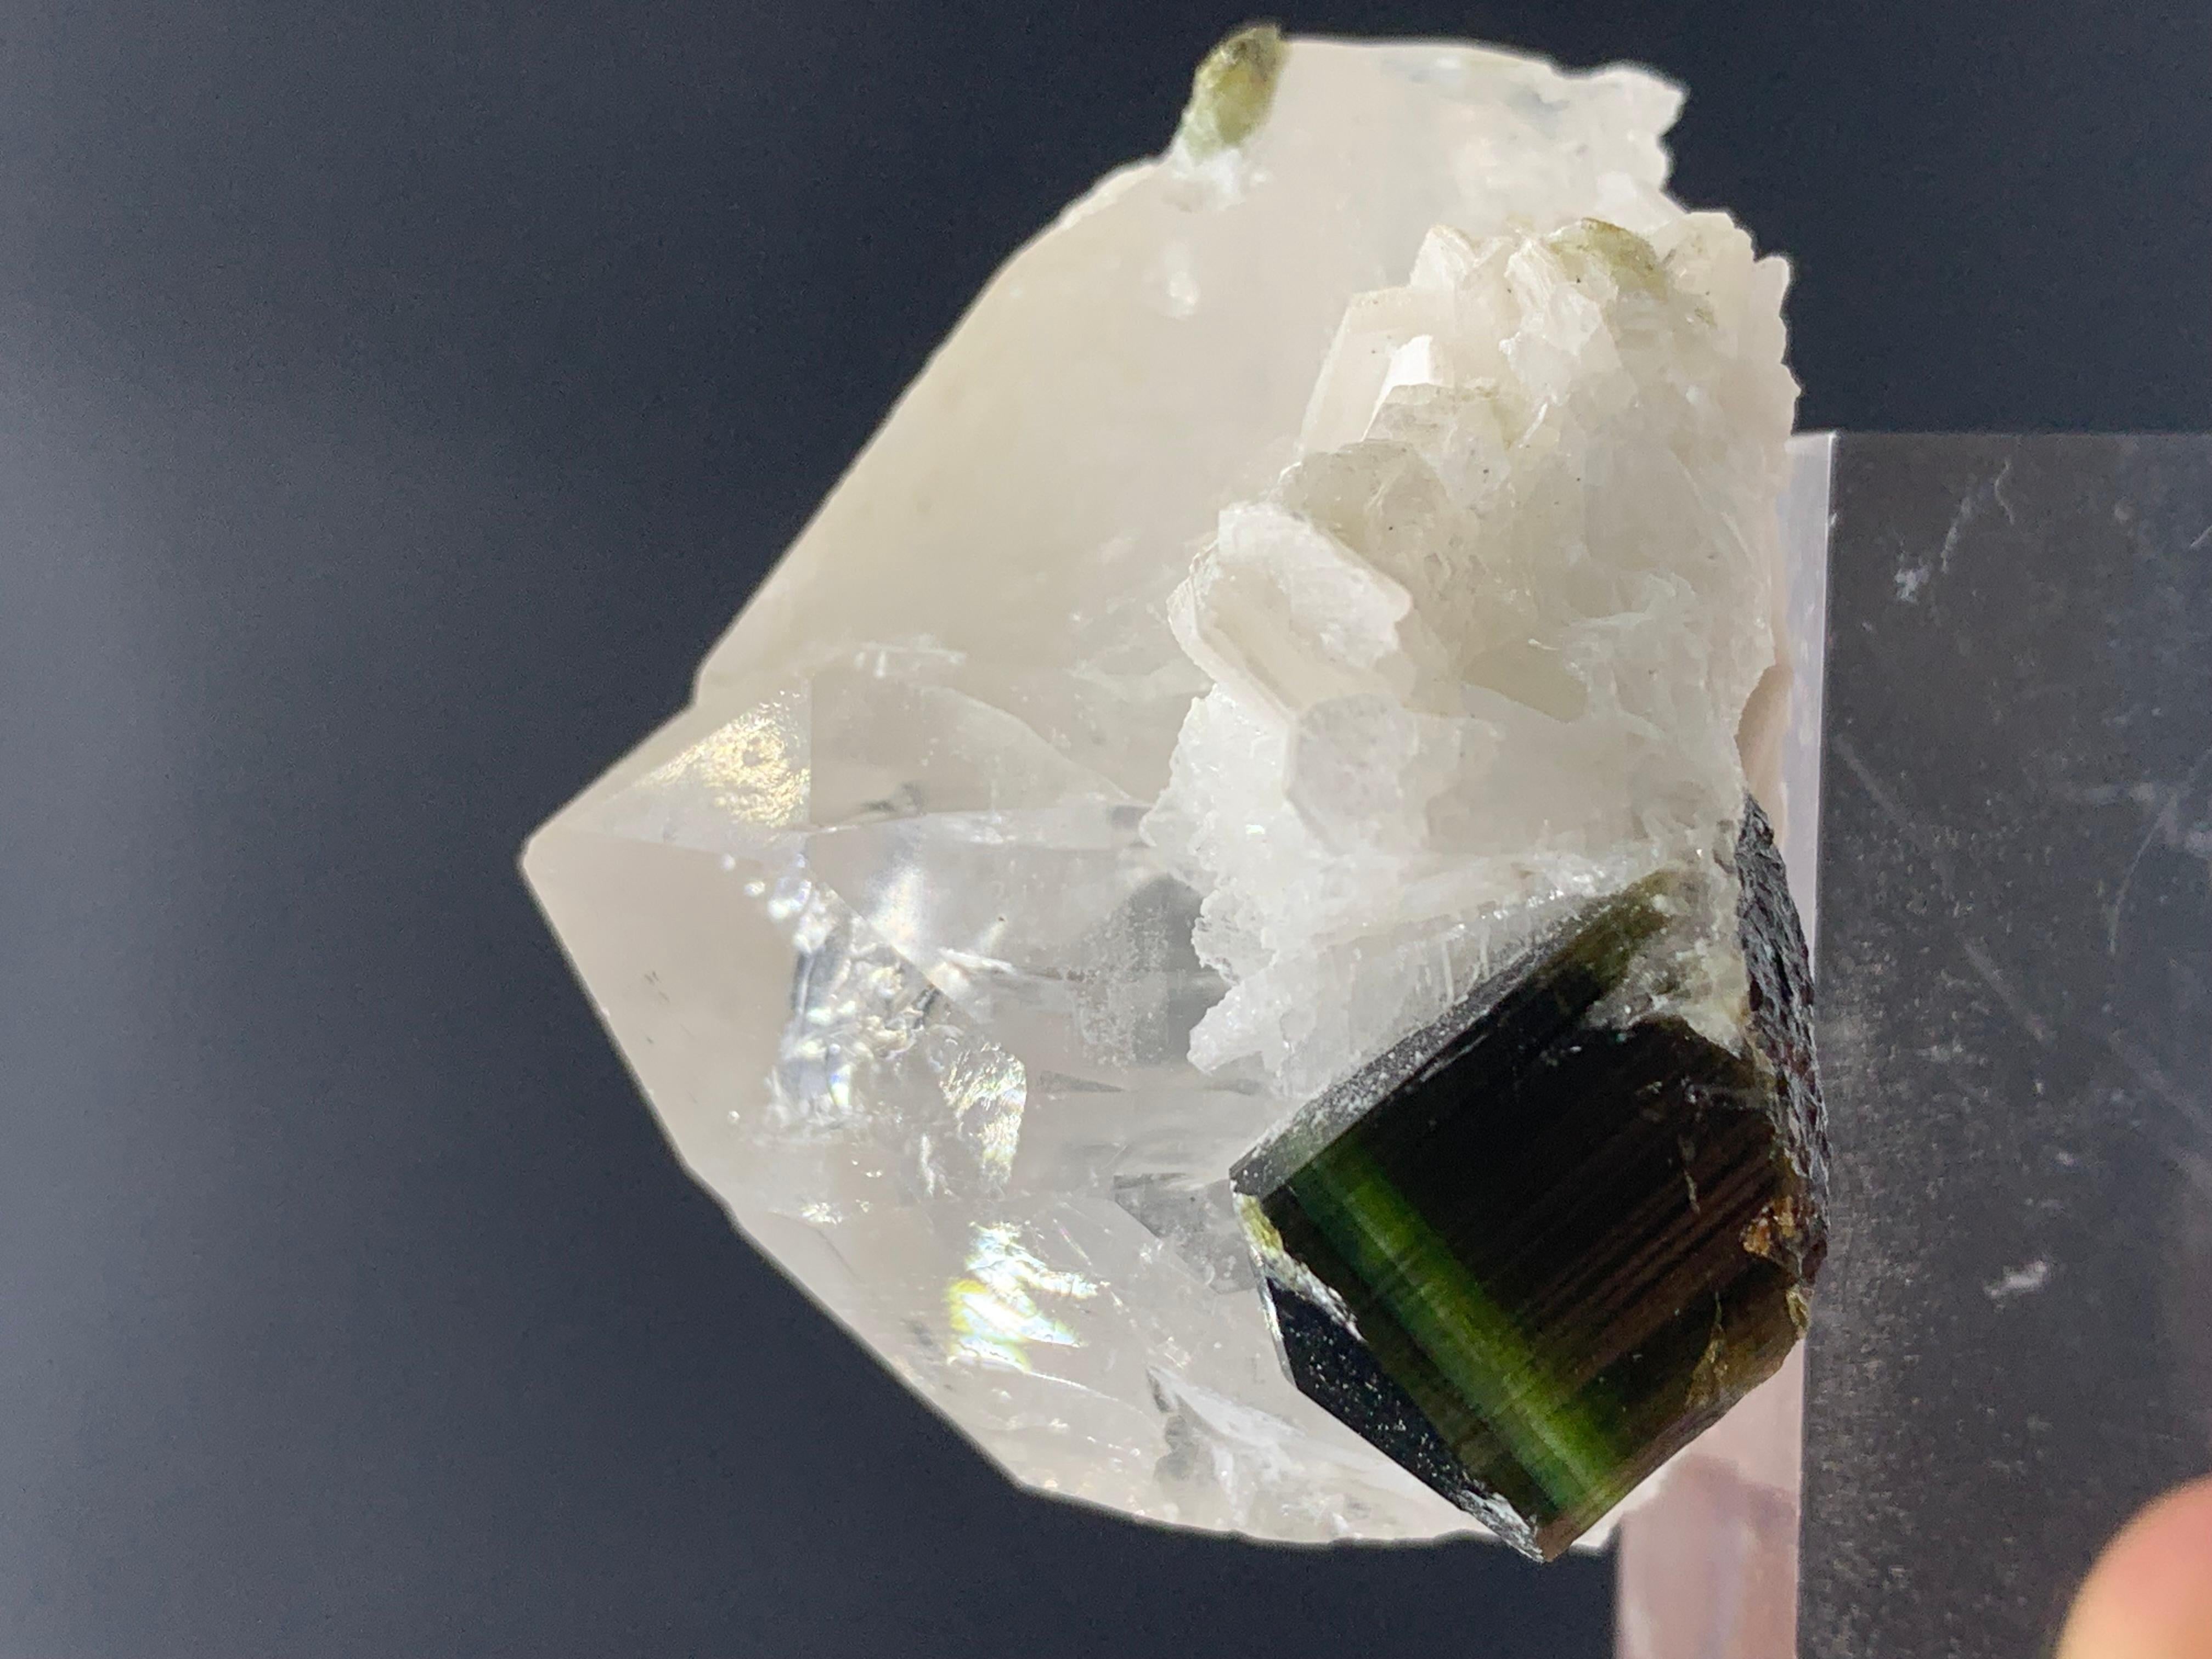 43.07 Gram Elegant Bi Color Tourmaline Specimen With Quartz From skardu Pakistan
Weight: 43.07 Gram
Dimension: 3.4 x 4.2 x 3.5 Cm
Origin: Skardu Valley, Pakistan 

Tourmaline is a crystalline silicate mineral group in which boron is compounded with